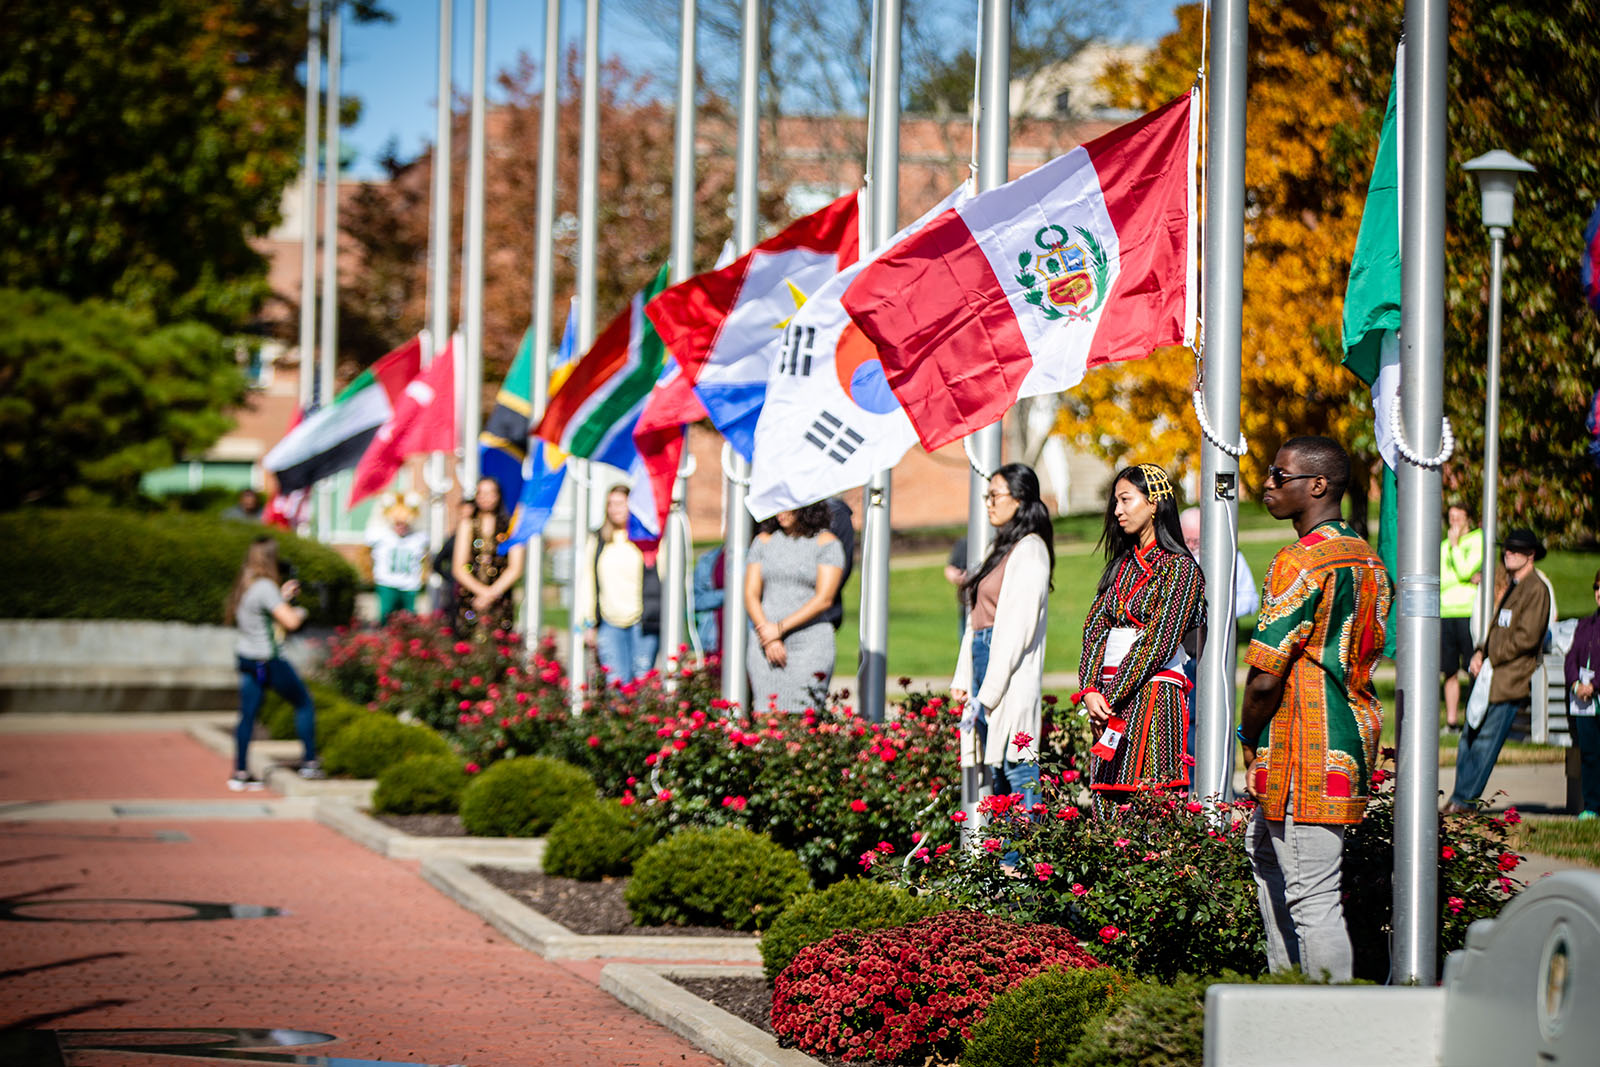 Northwest international students participate in a flag-raising ceremony during Homecoming activities each fall to celebrate their homelands and cultures as well the University’s diversity. 